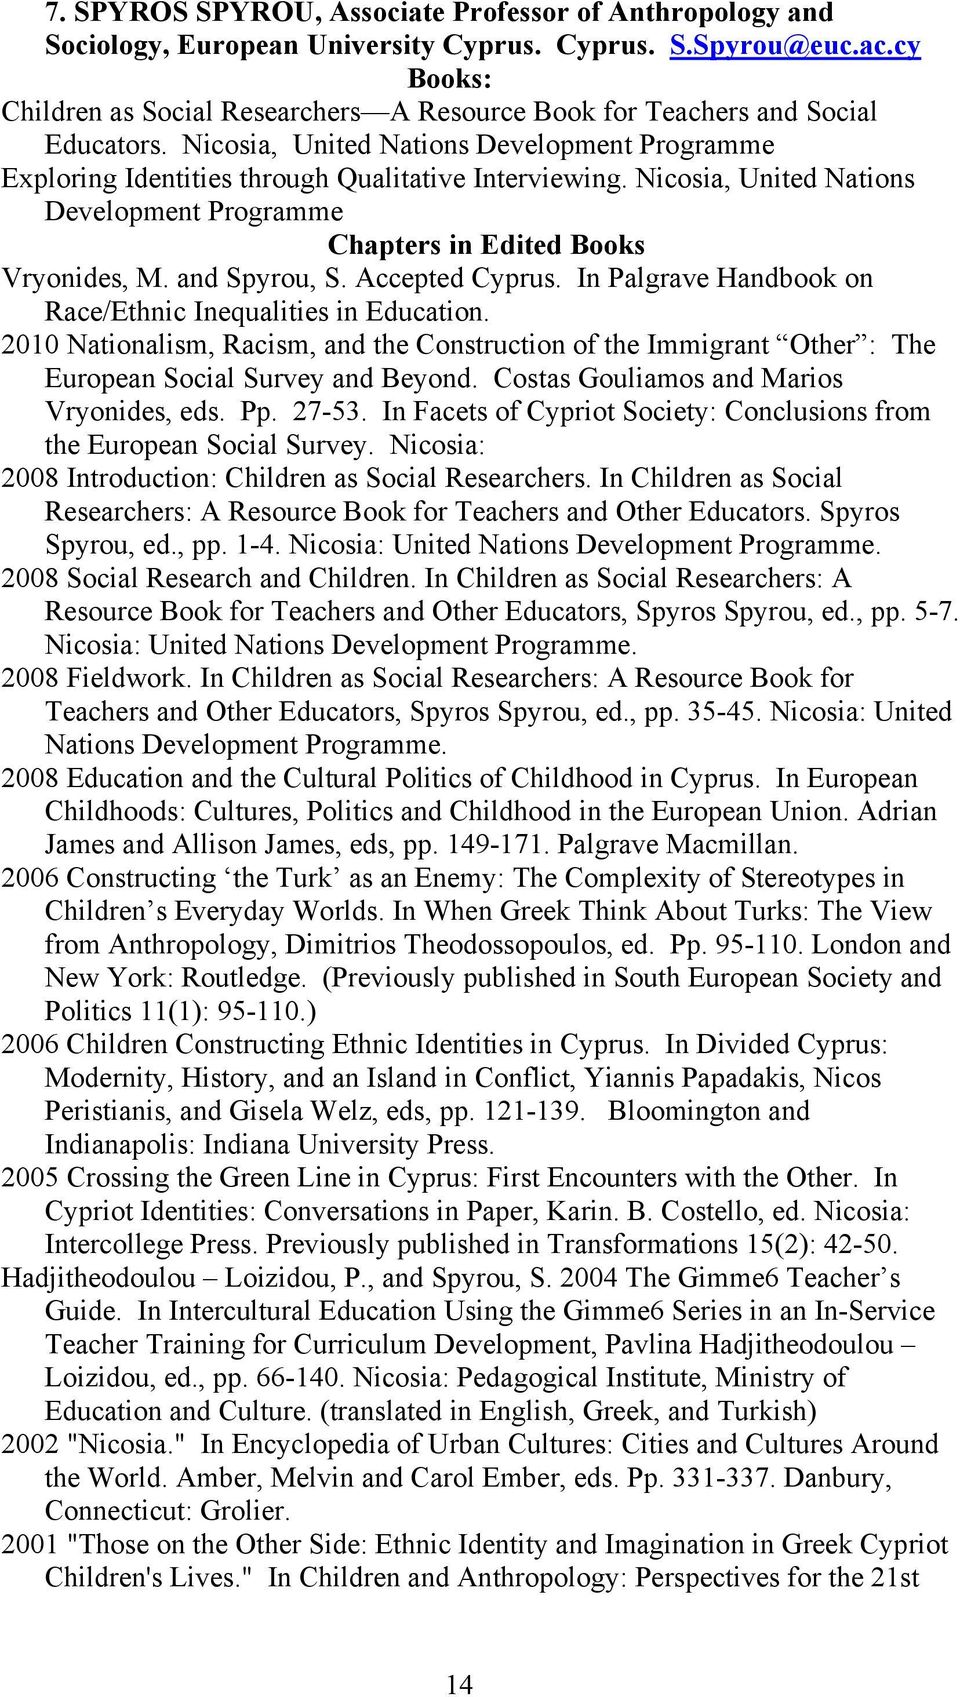 Nicosia, United Nations Development Programme Chapters in Edited Books Vryonides, M. and Spyrou, S. Accepted Cyprus. In Palgrave Handbook on Race/Ethnic Inequalities in Education.